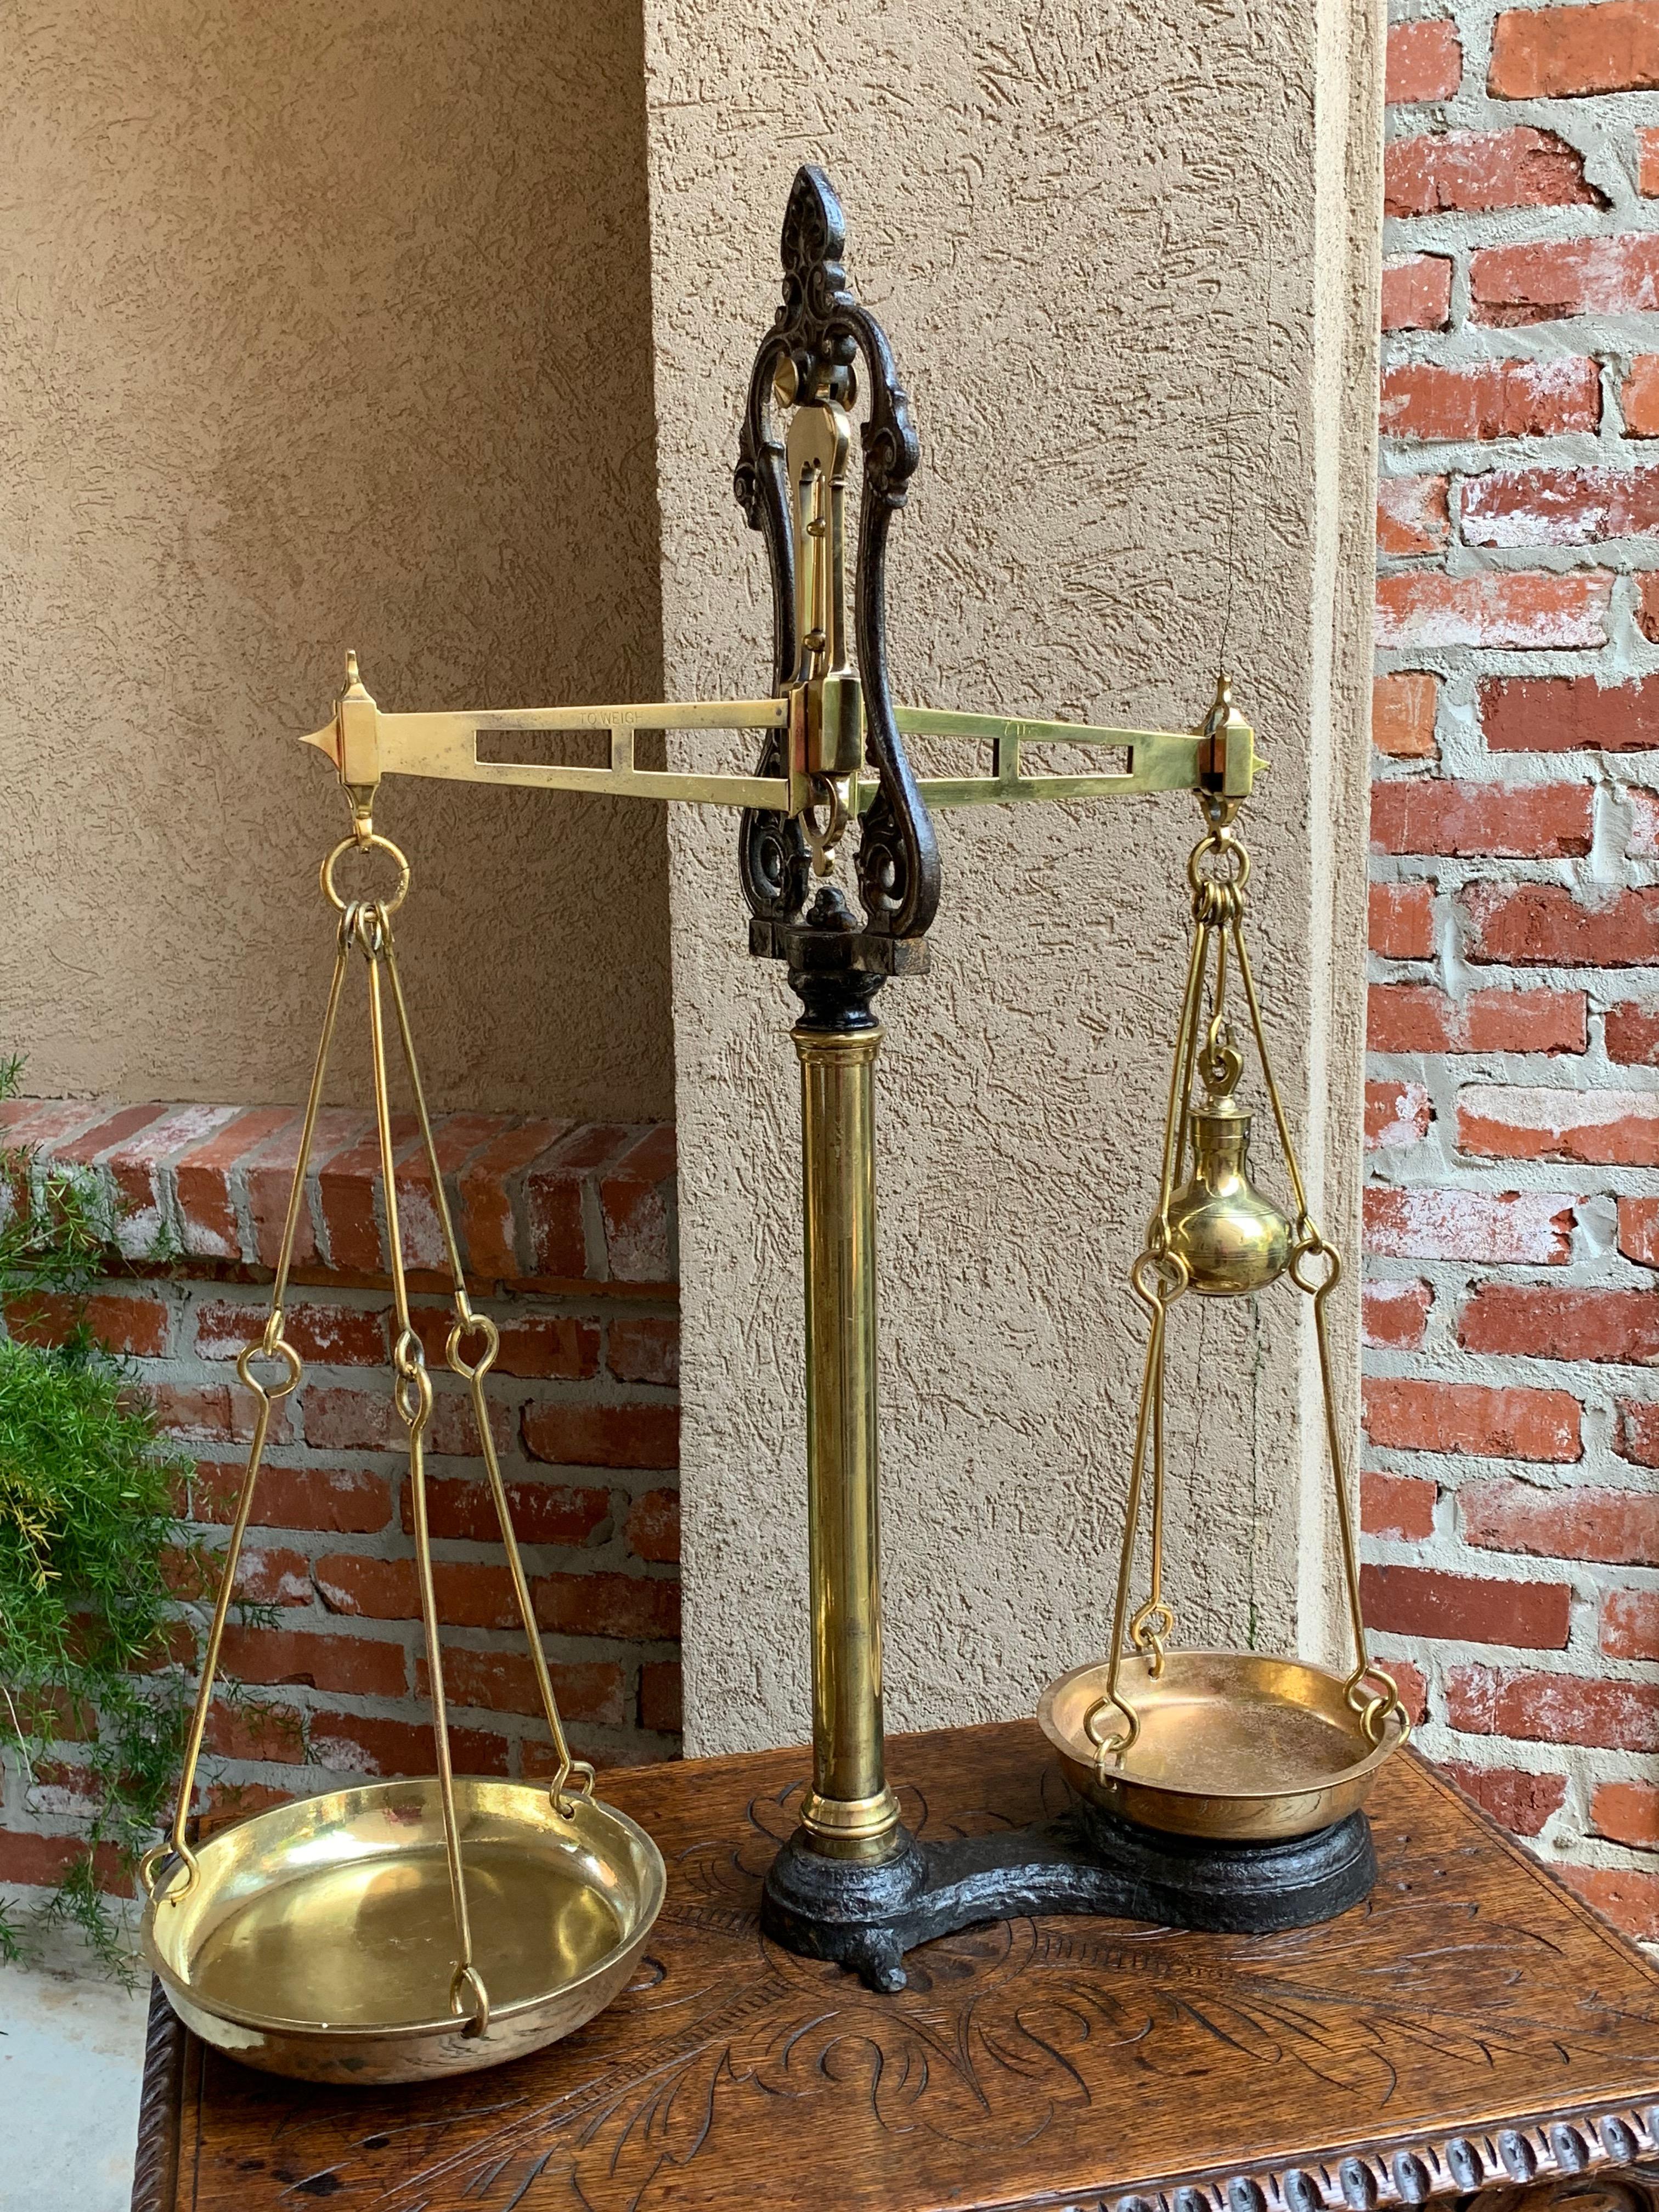 ~ Direct from England
A gorgeous and large genuine antique brass and cast iron merchant scale.
We purchased this for the beautiful Silhouette, just image this displayed with seasonal décor on a large table or counter top!
Easily blends with any